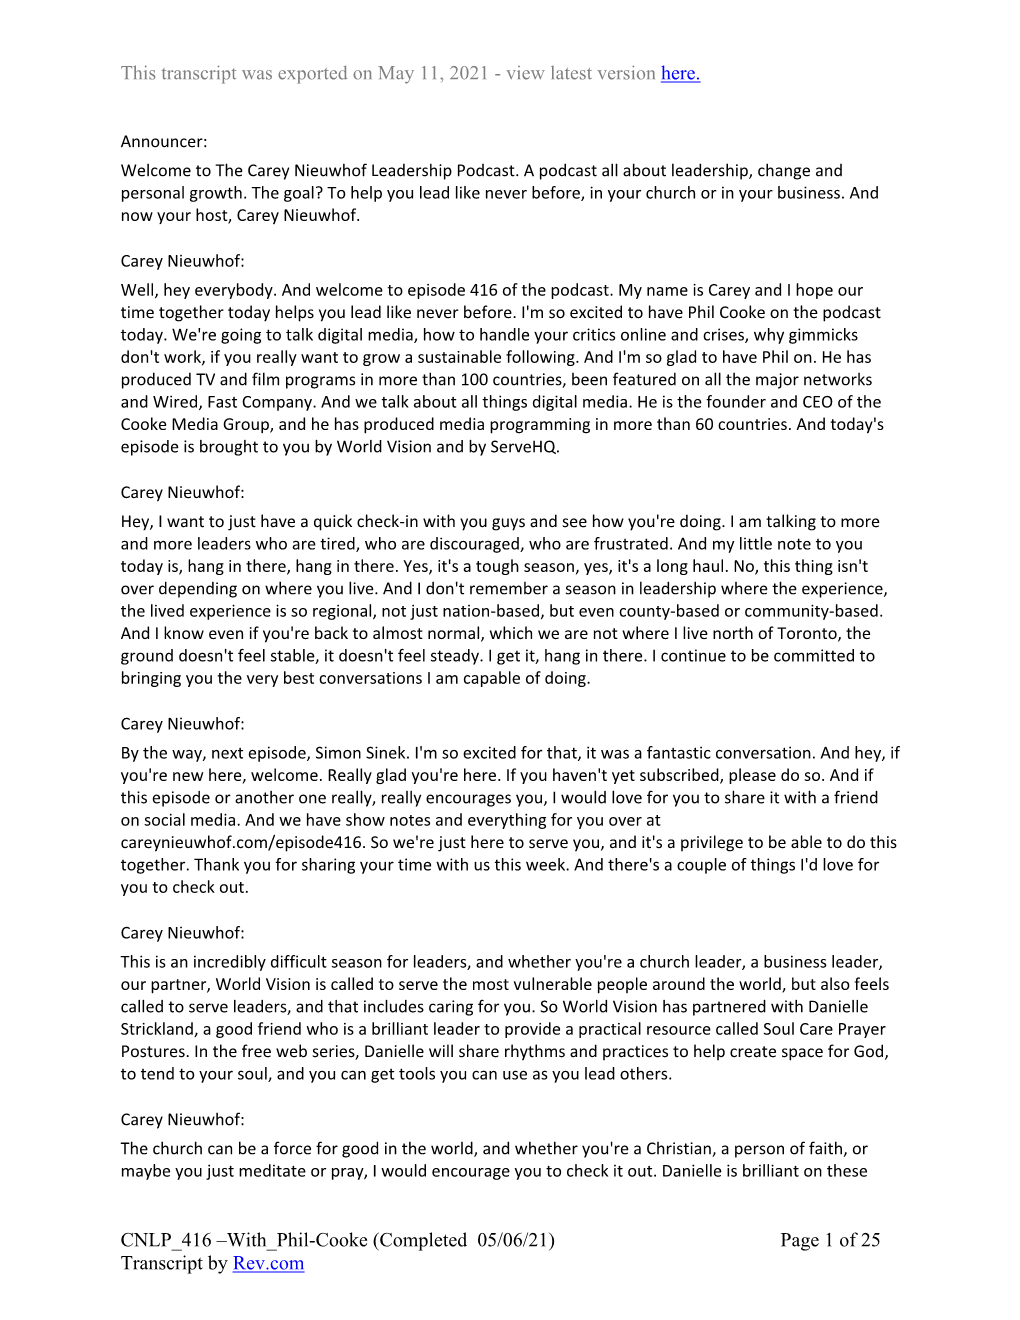 With Phil-Cooke (Completed 05/06/21) Page 1 of 25 Transcript by Rev.Com This Transcript Was Exported on May 11, 2021 - View Latest Version Here